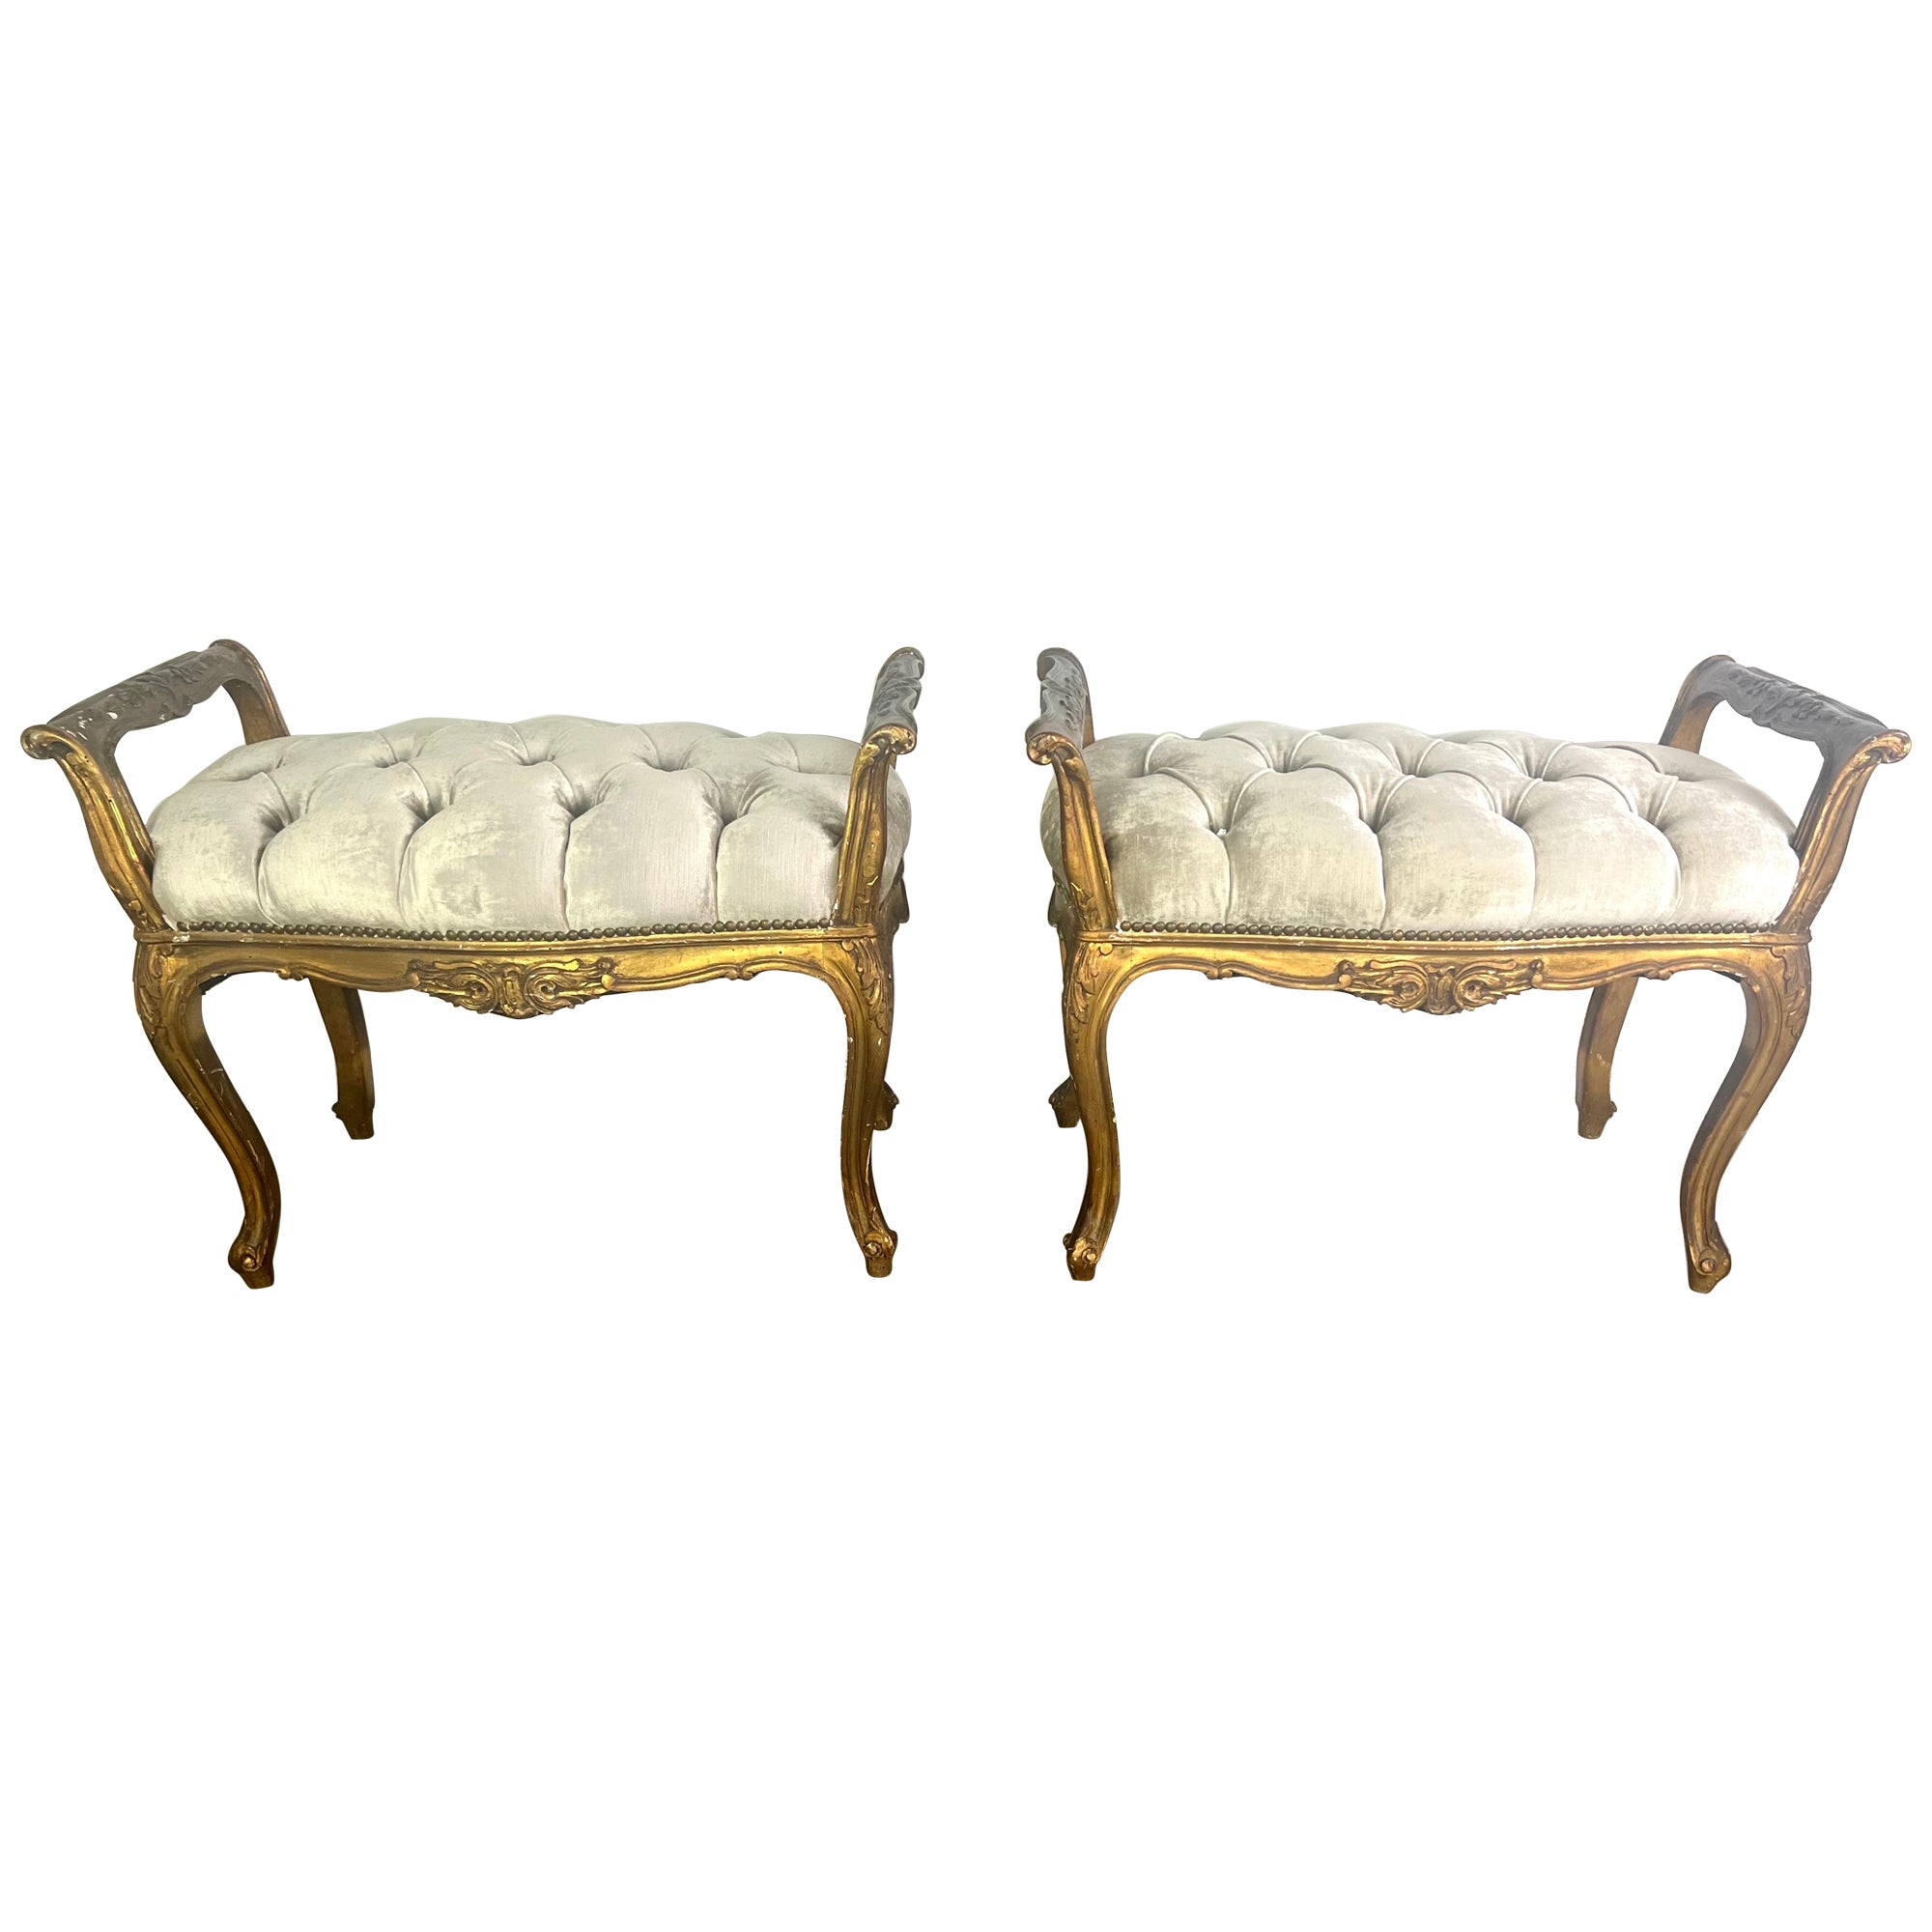 Pair of French Louis XV Style Gilt Wood Benches